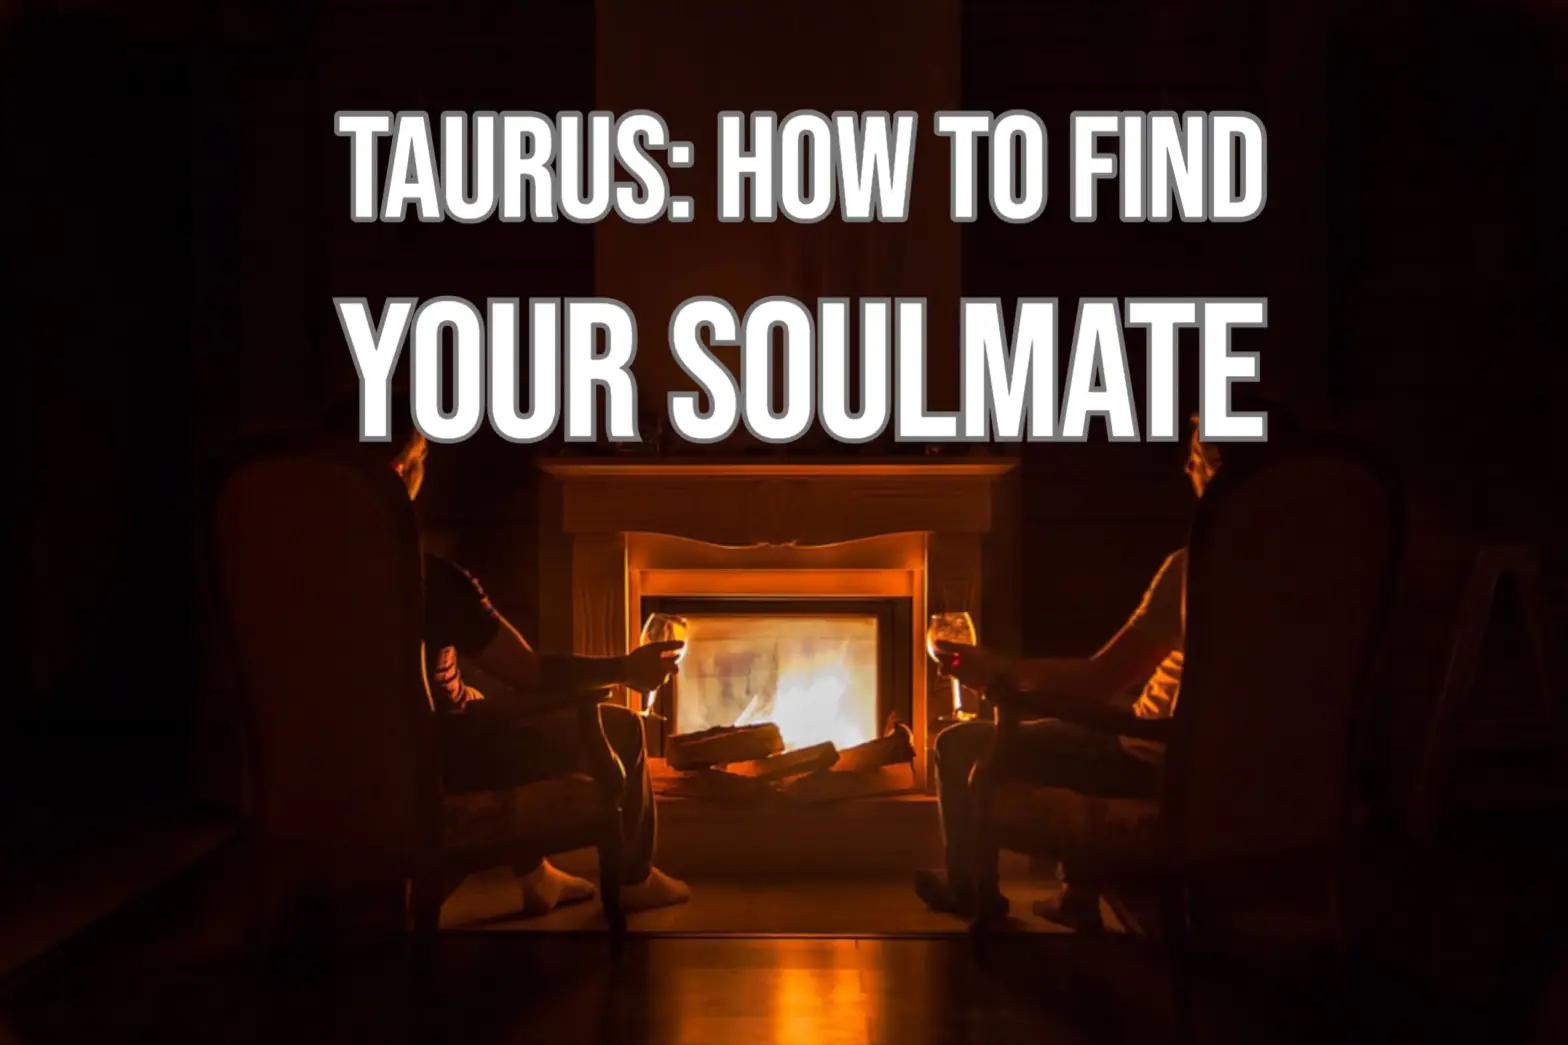 Taurus Soulmate: How Do You Find Your Soulmate?